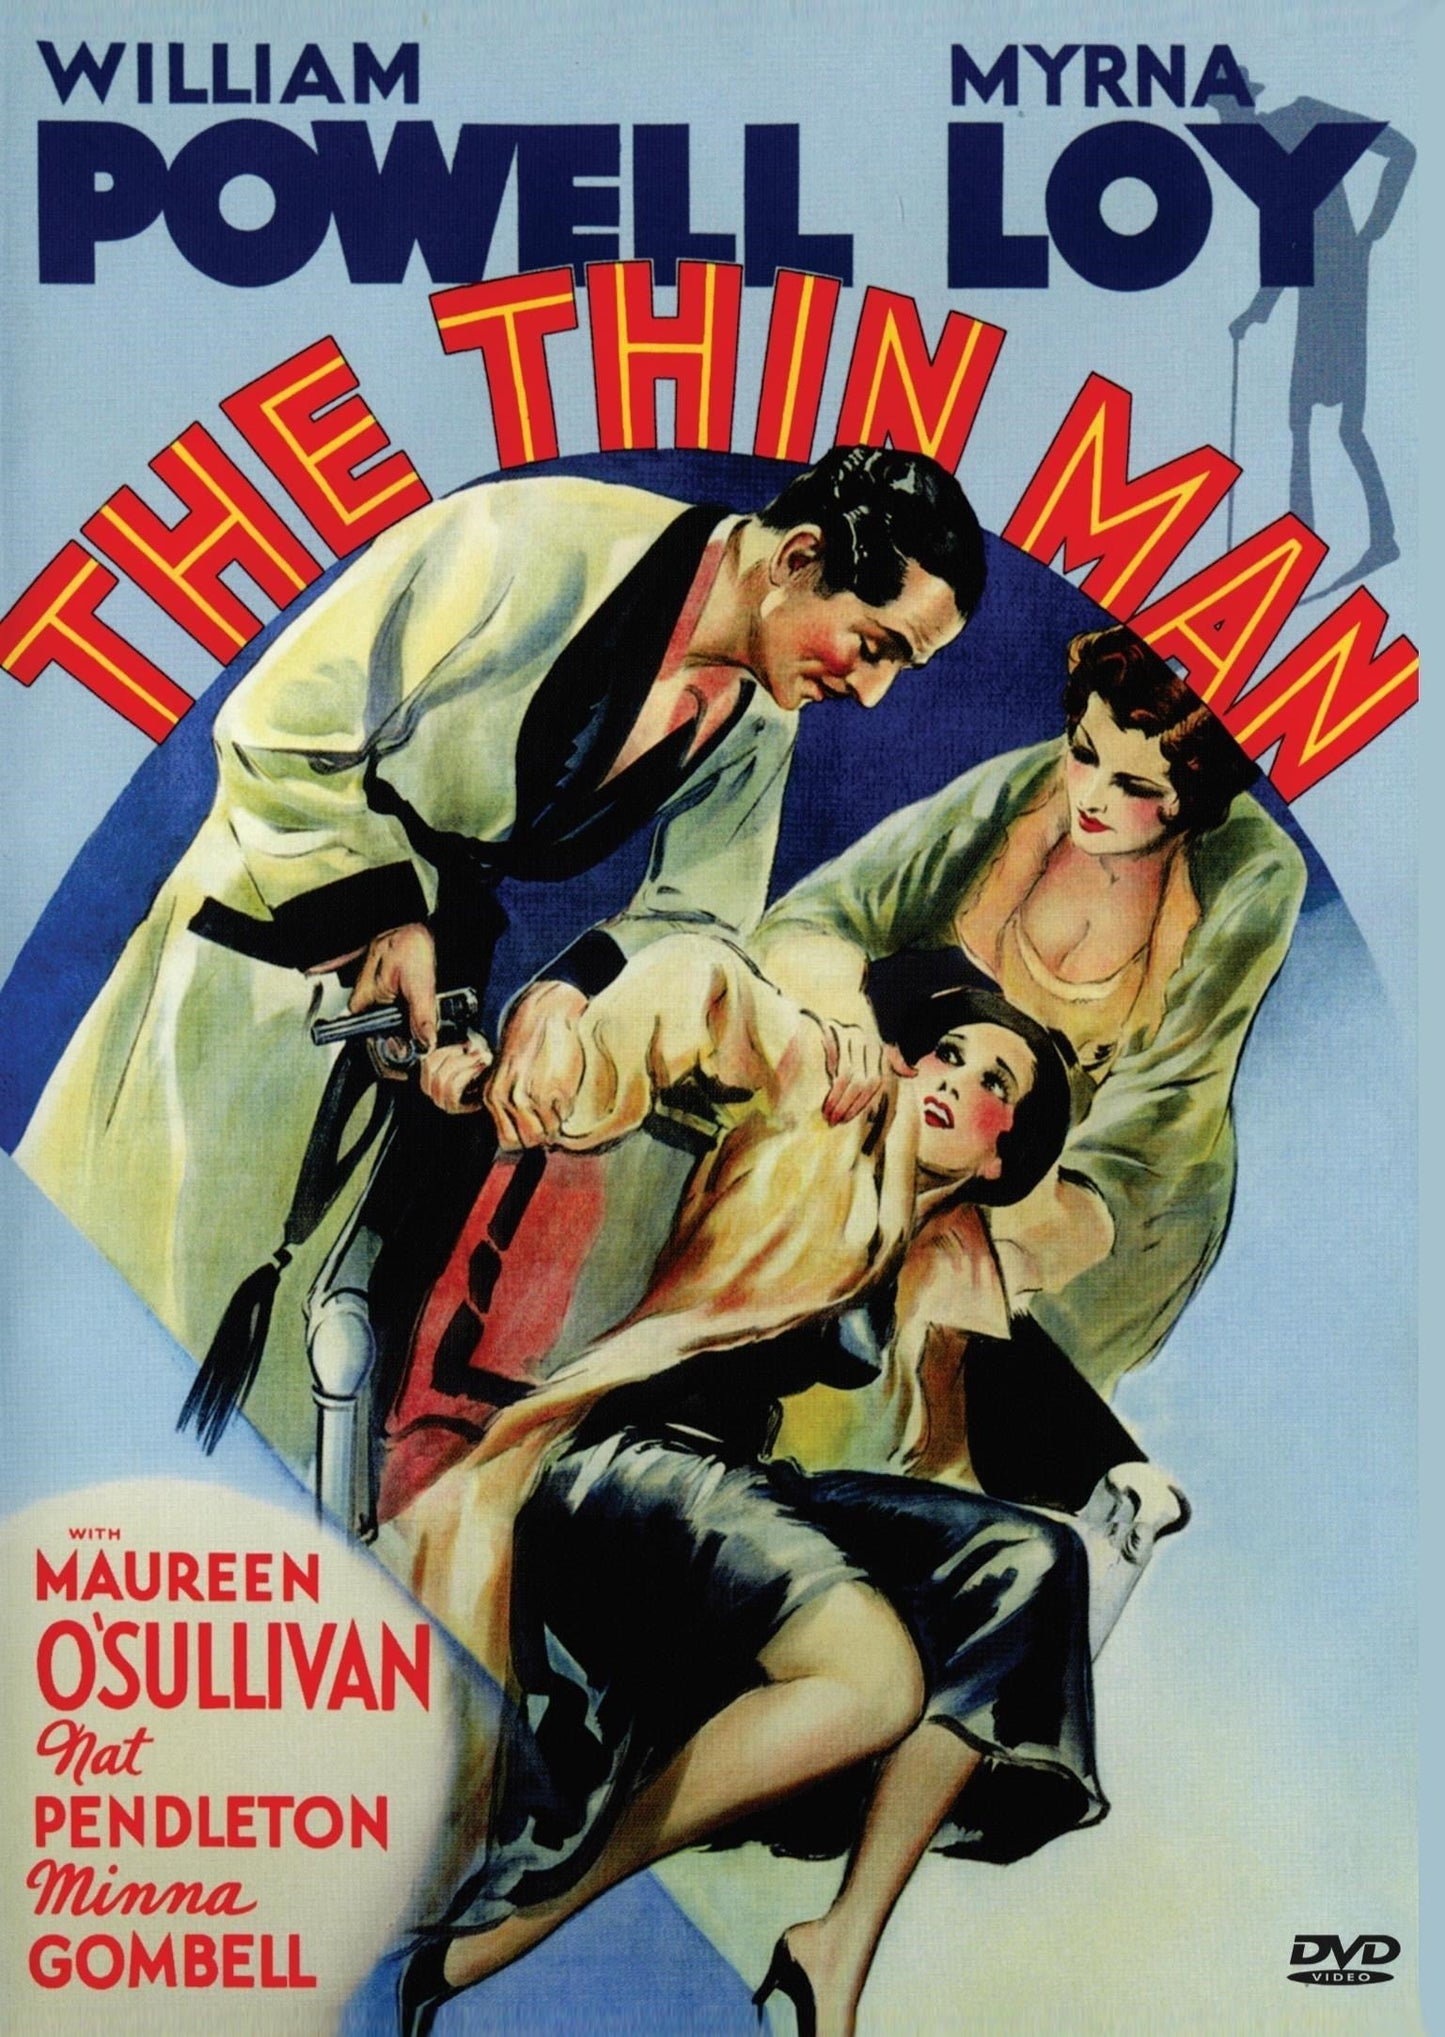 The Thin Man rareandcollectibledvds